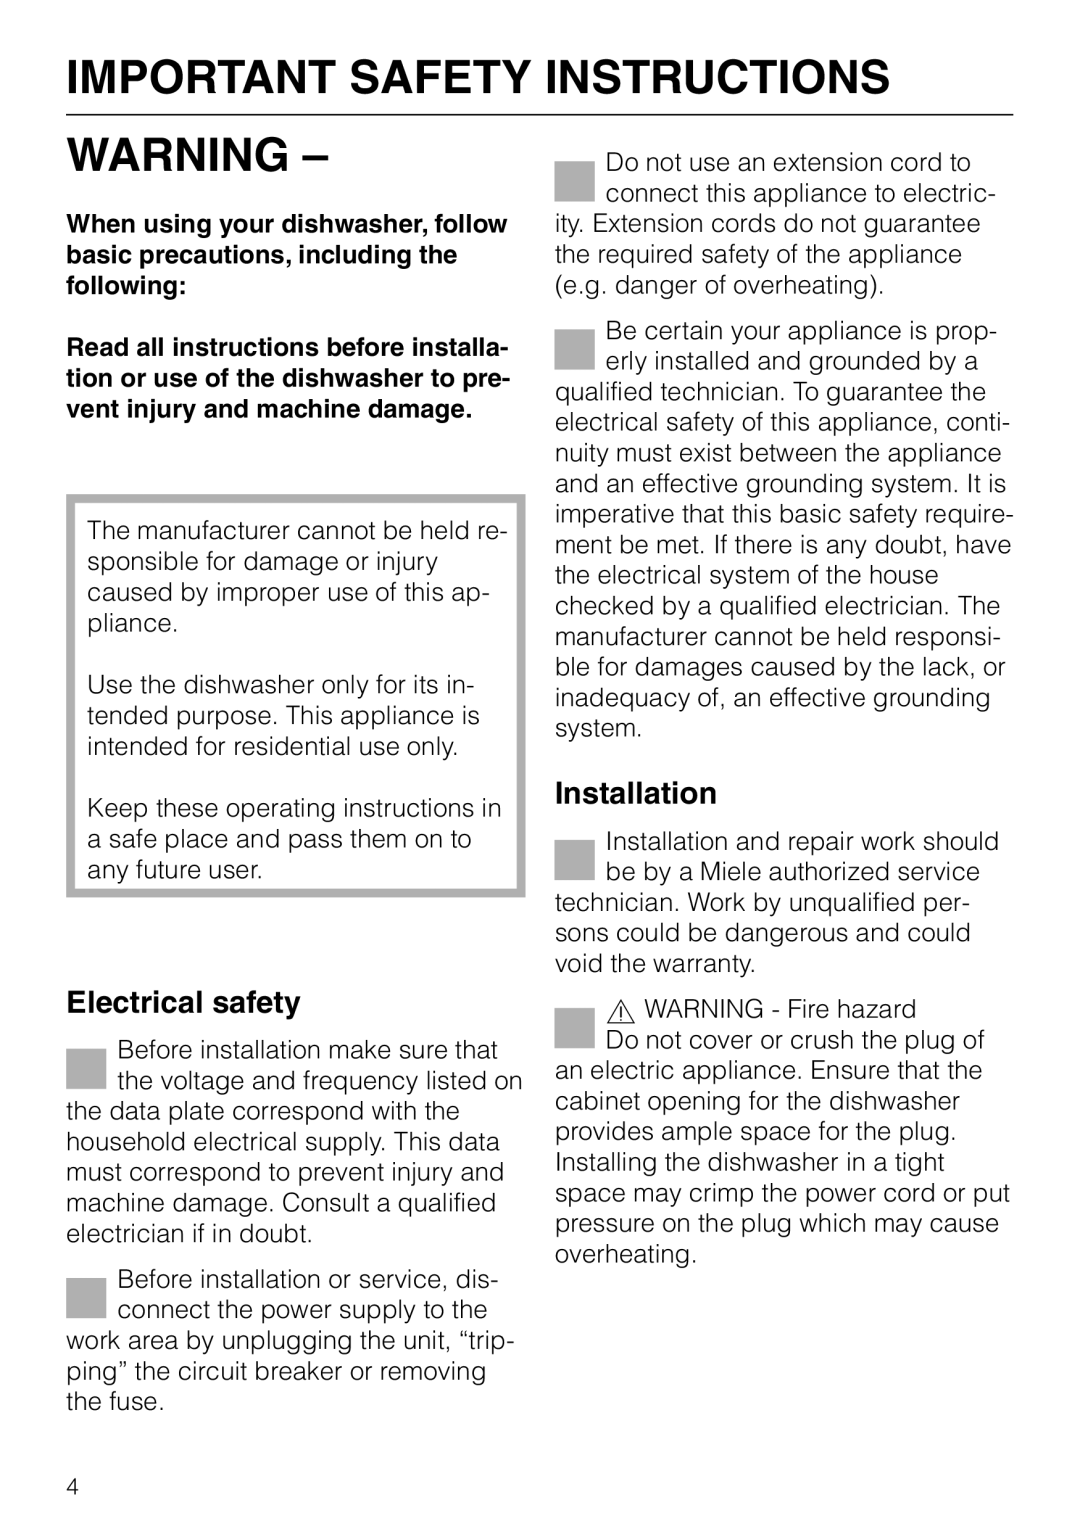 Miele G 863 PLUS, G 663 PLUS operating instructions Important Safety Instructions, Electrical safety, Installation 